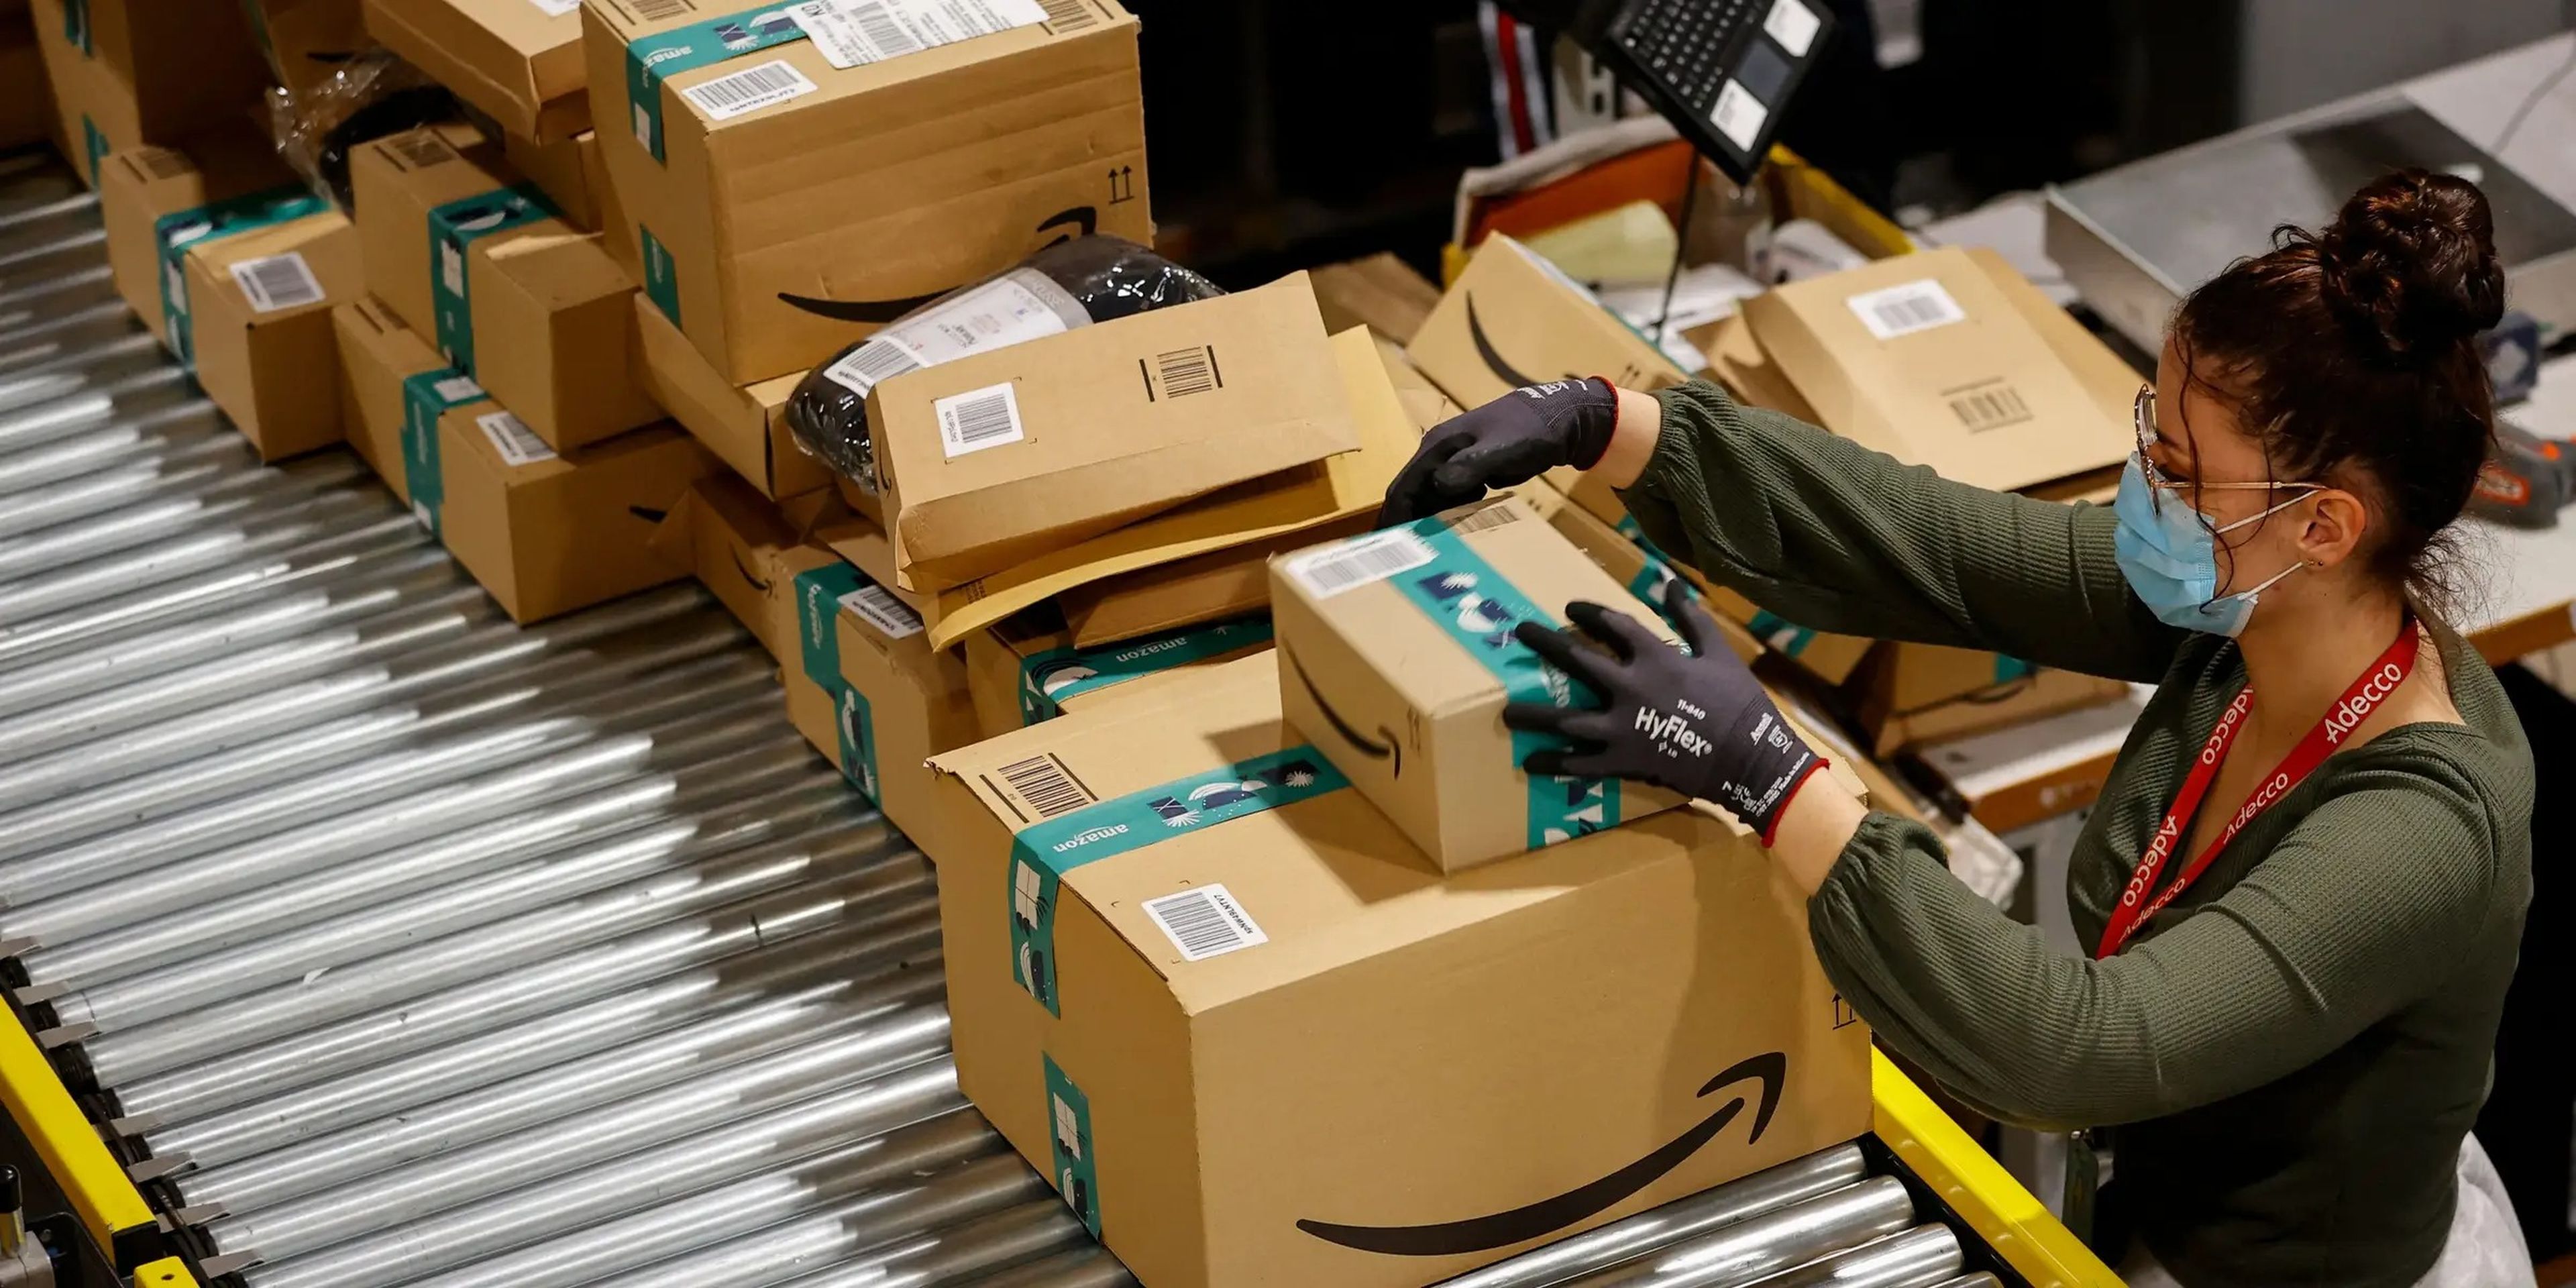 An employee handles packages at the Amazon's Bretigny-sur-Orge warehouse in France.